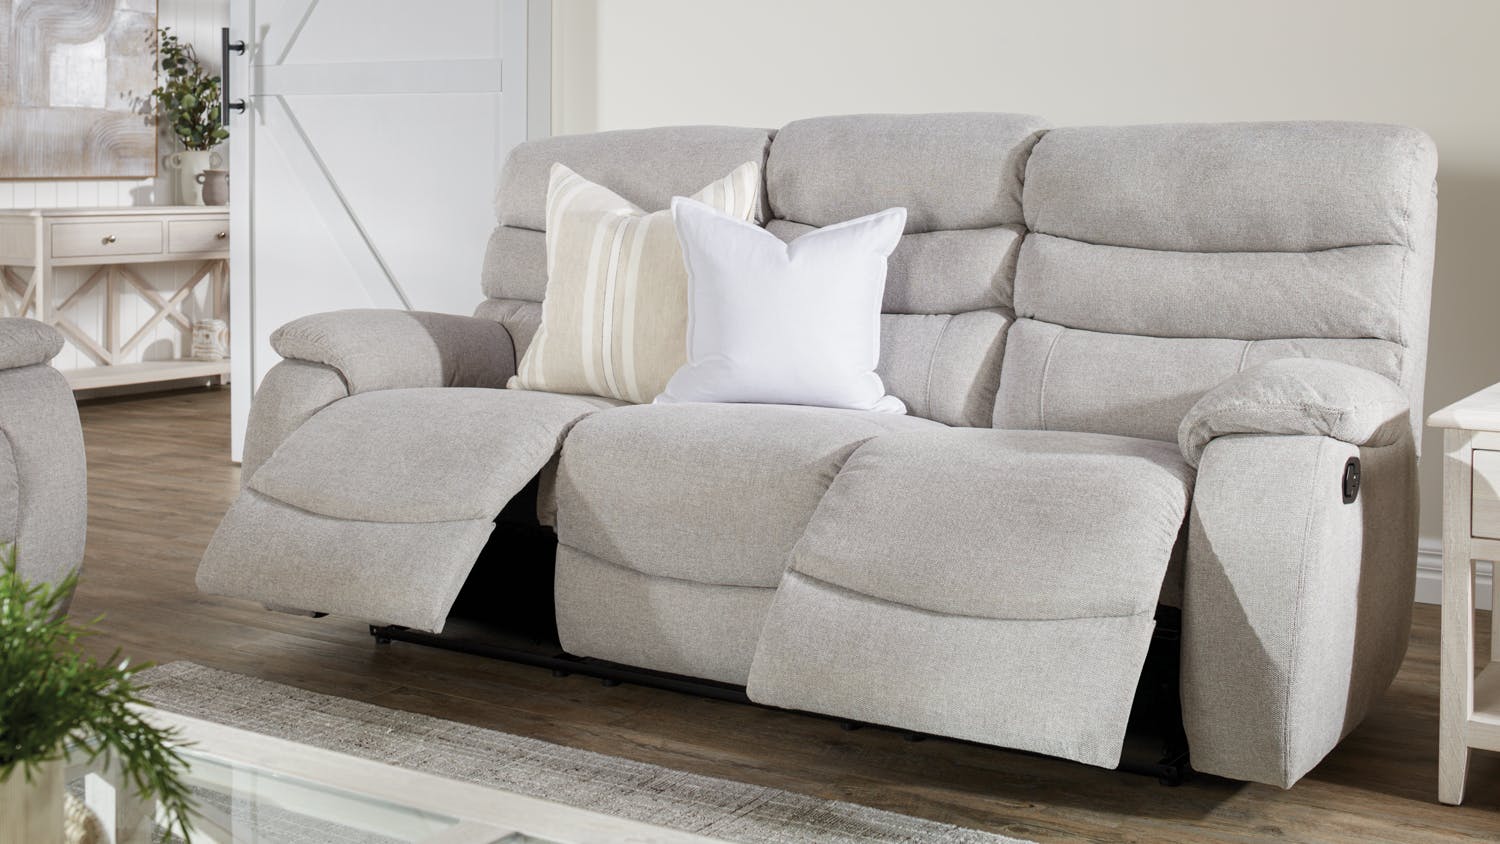 Stirling 3 Seater Fabric Recliner Sofa